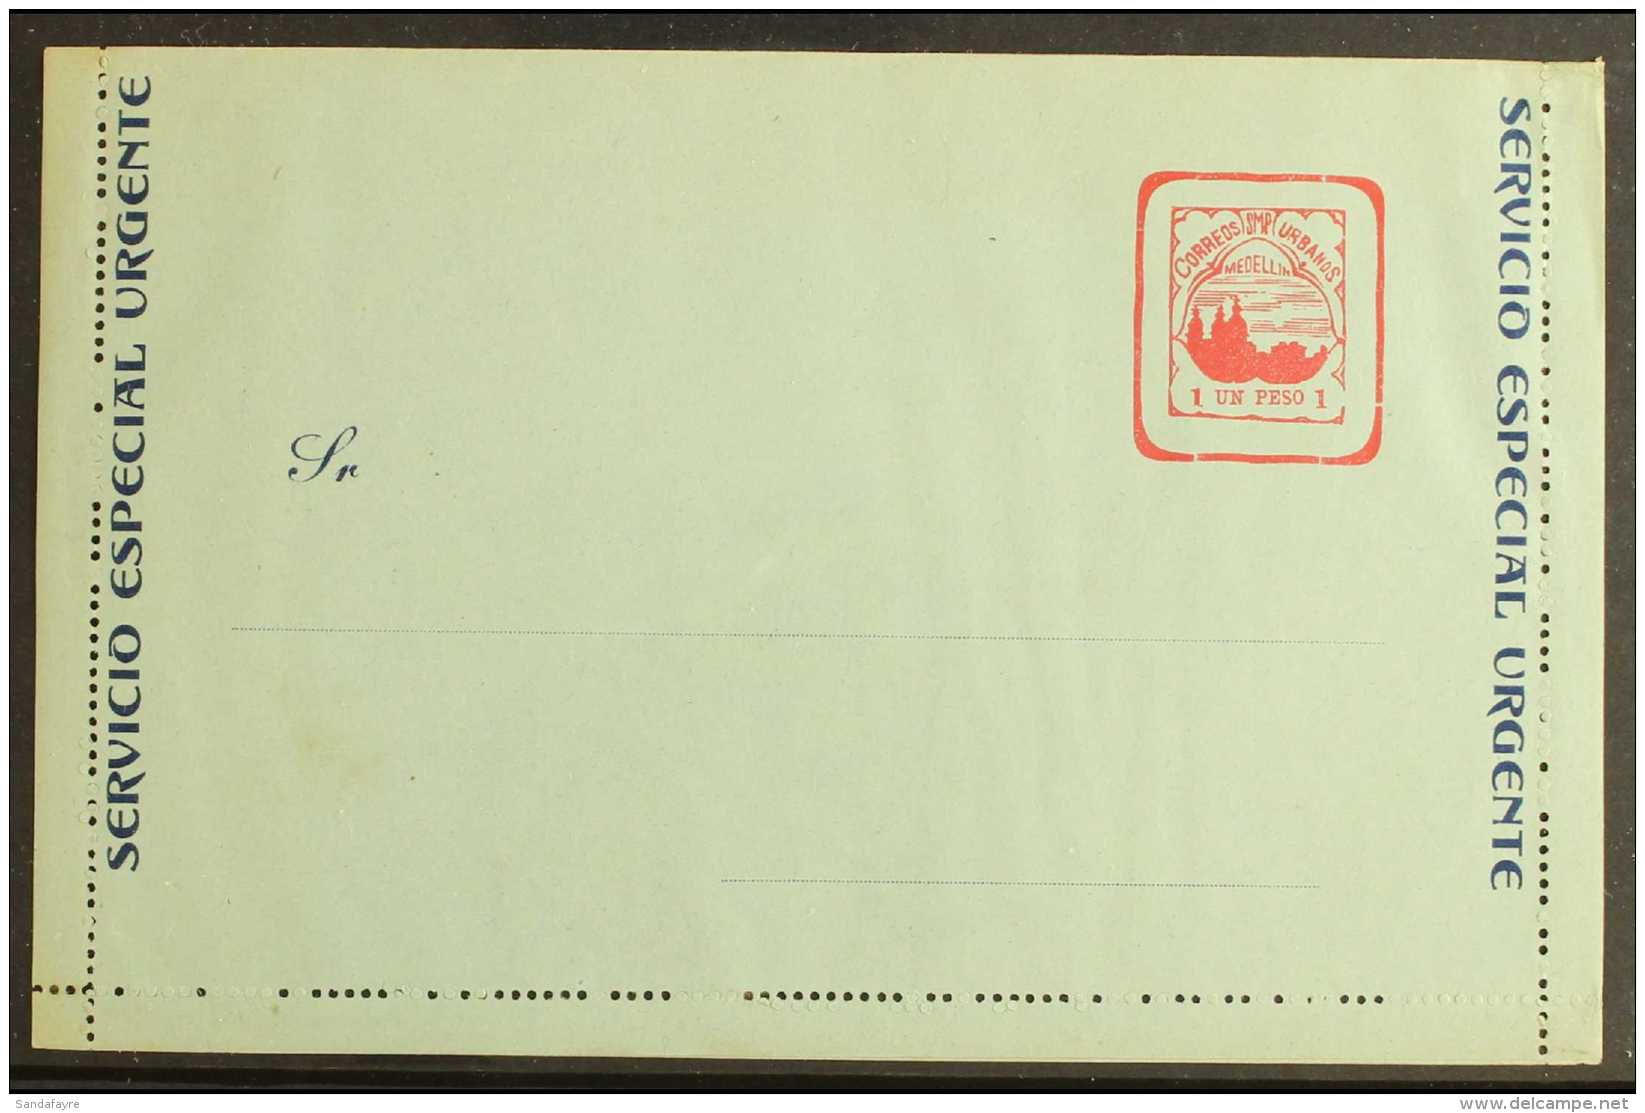 MEDELLIN - POSTAL STATIONERY 1904 Letter Card "Un Peso" Red On Light Green With Dark Blue Text, Higgins &amp; Gage... - Colombia